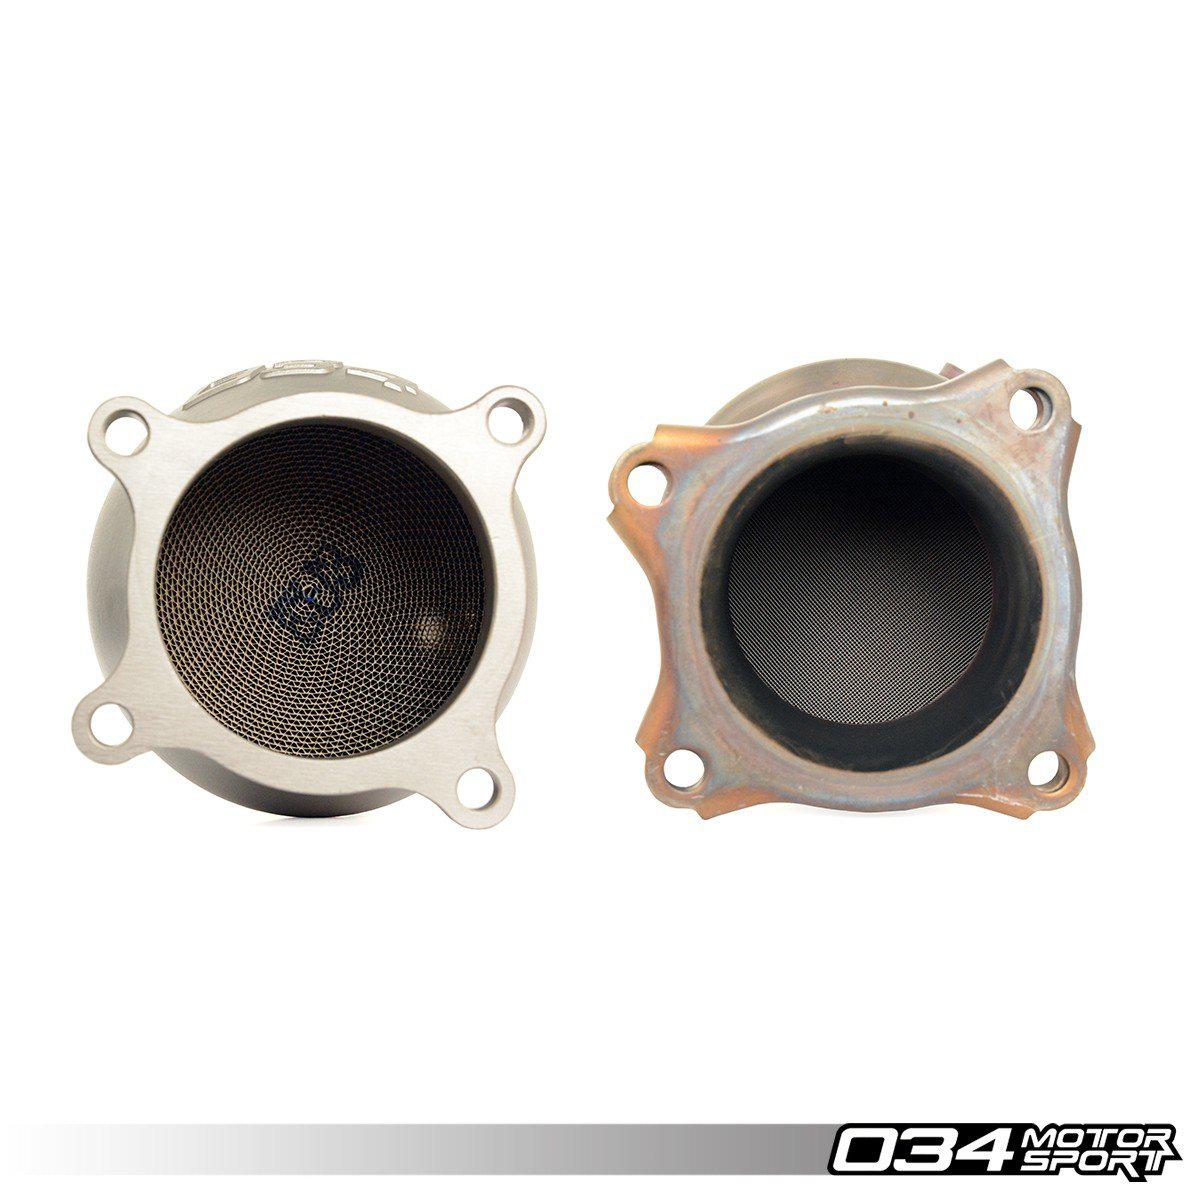 Cast Stainless Steel Racing Catalyst, B9 Audi A4/A5 &amp; Allroad 2.0 TFSI-A Little Tuning Co